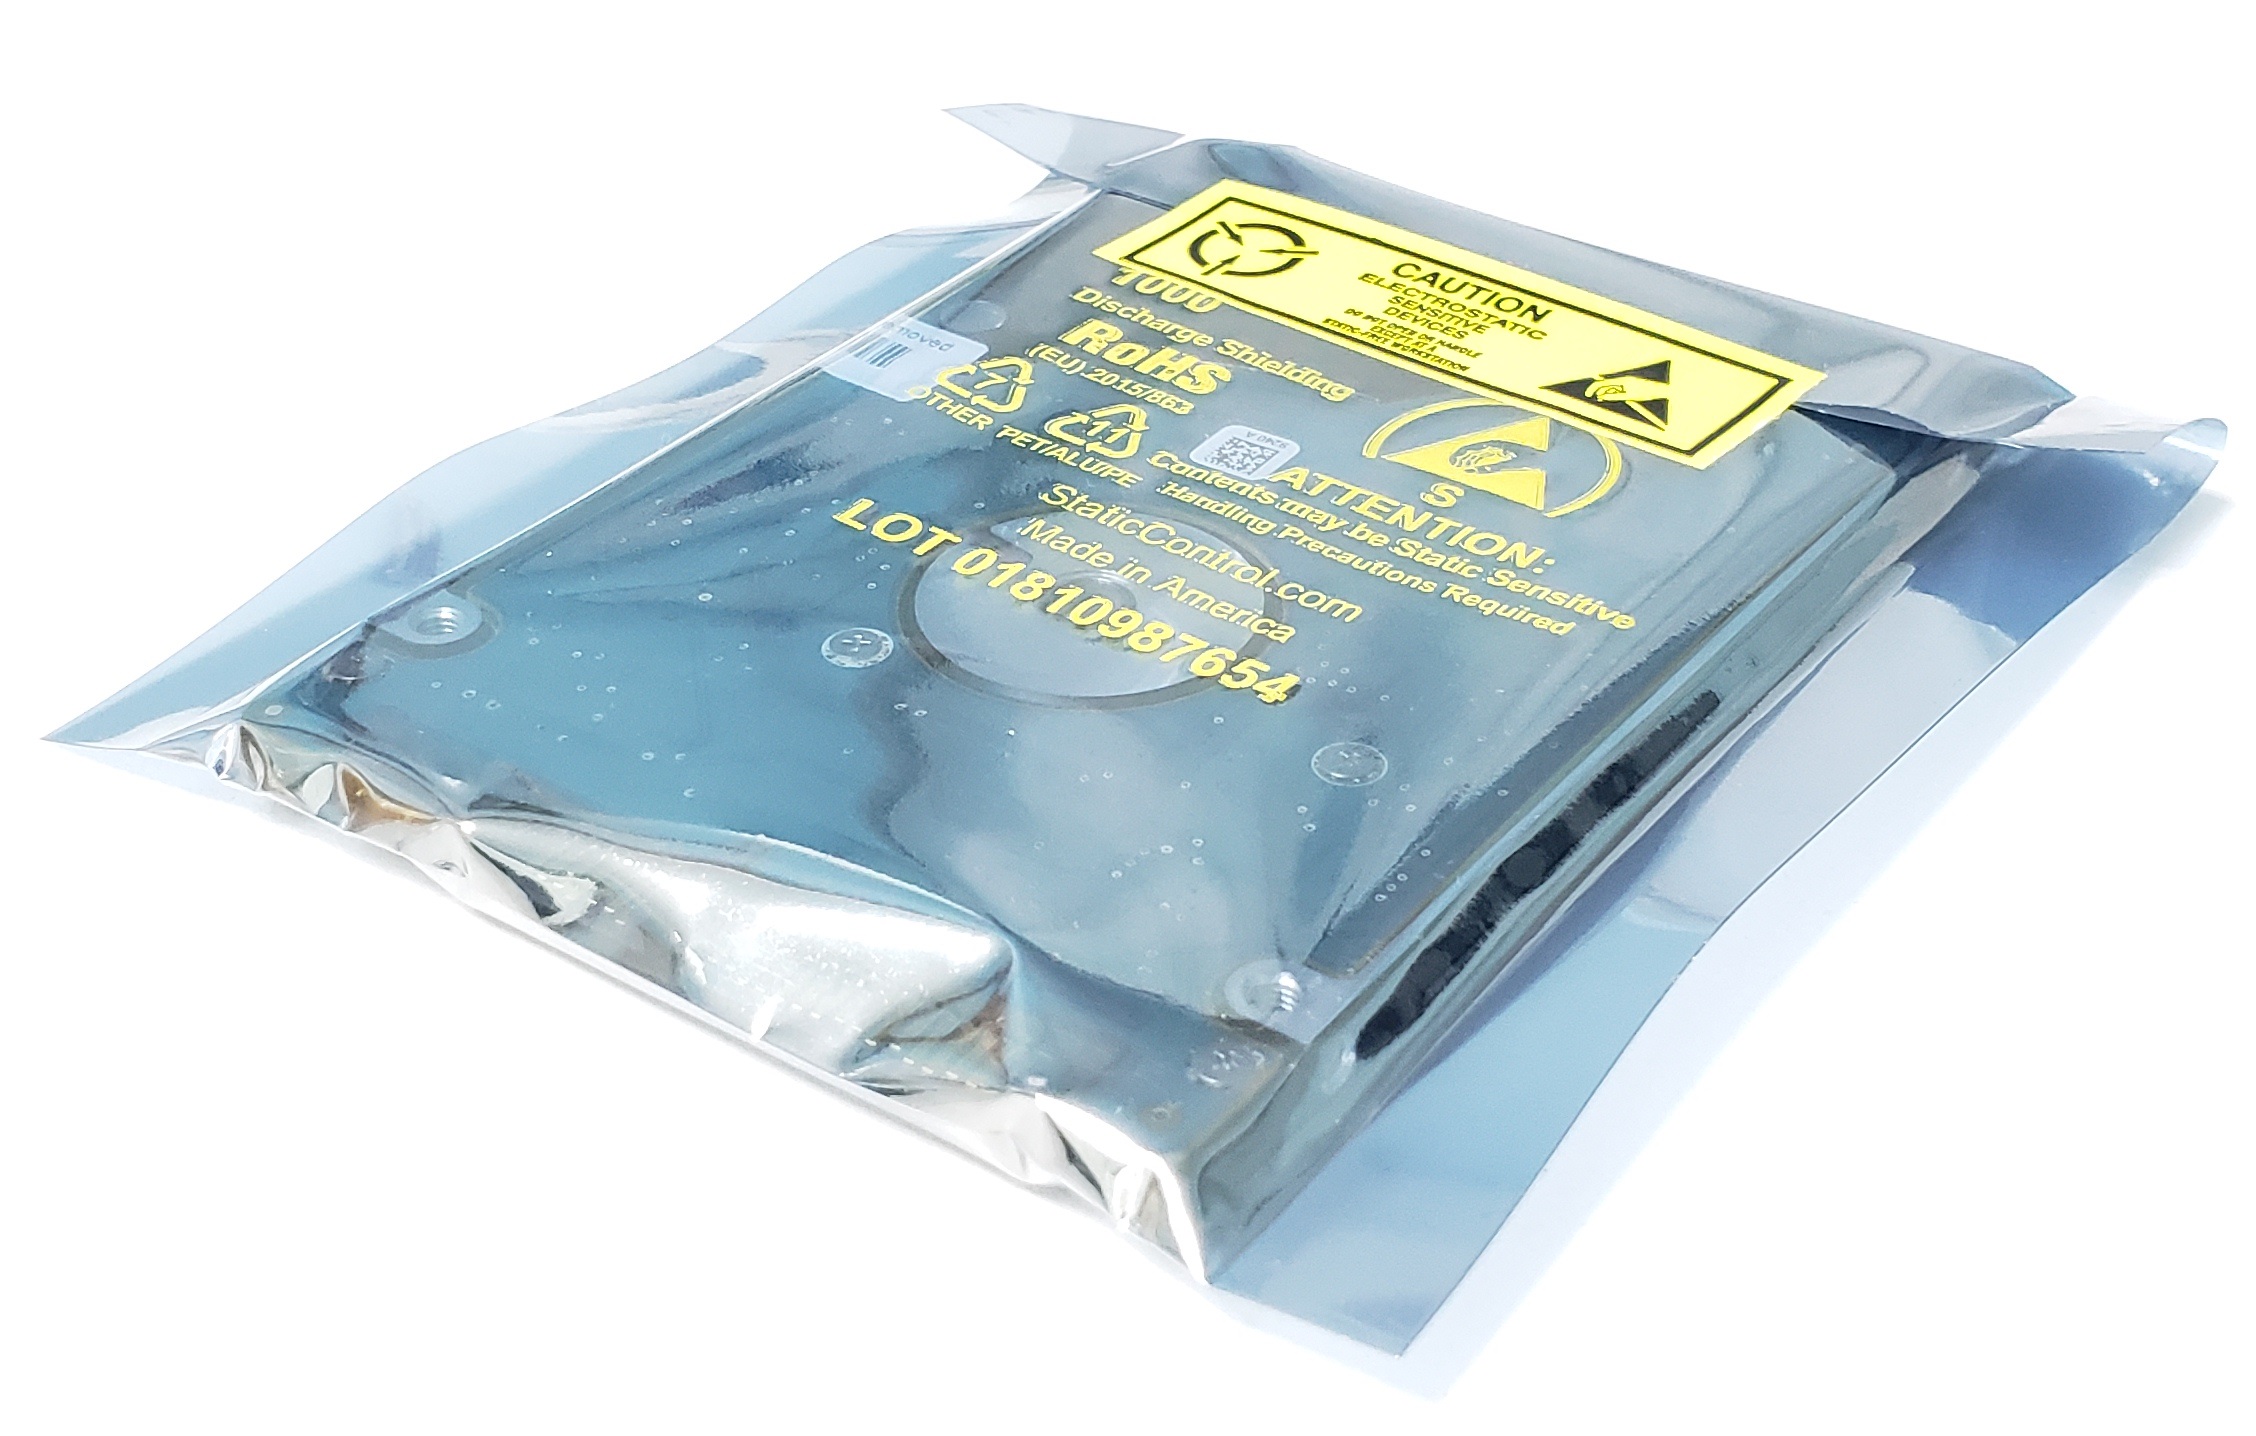 Anti Static Bag for 3.5 inches Hard Drive - 1 Box of 1000 Anti Static Bags